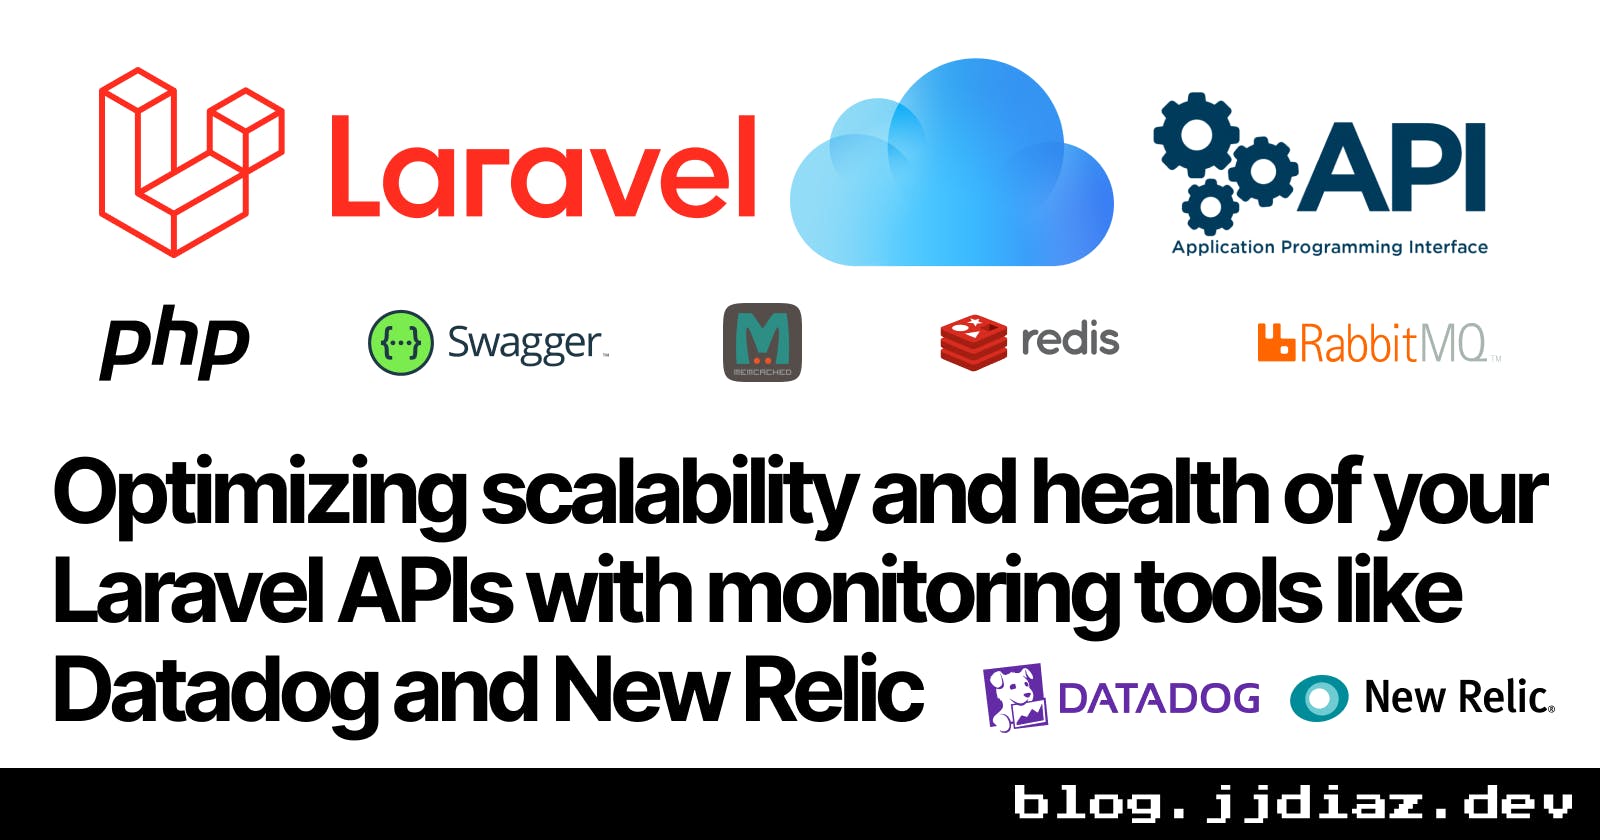 Optimizing scalability and health of your Laravel APIs with monitoring tools like Datadog and New Relic